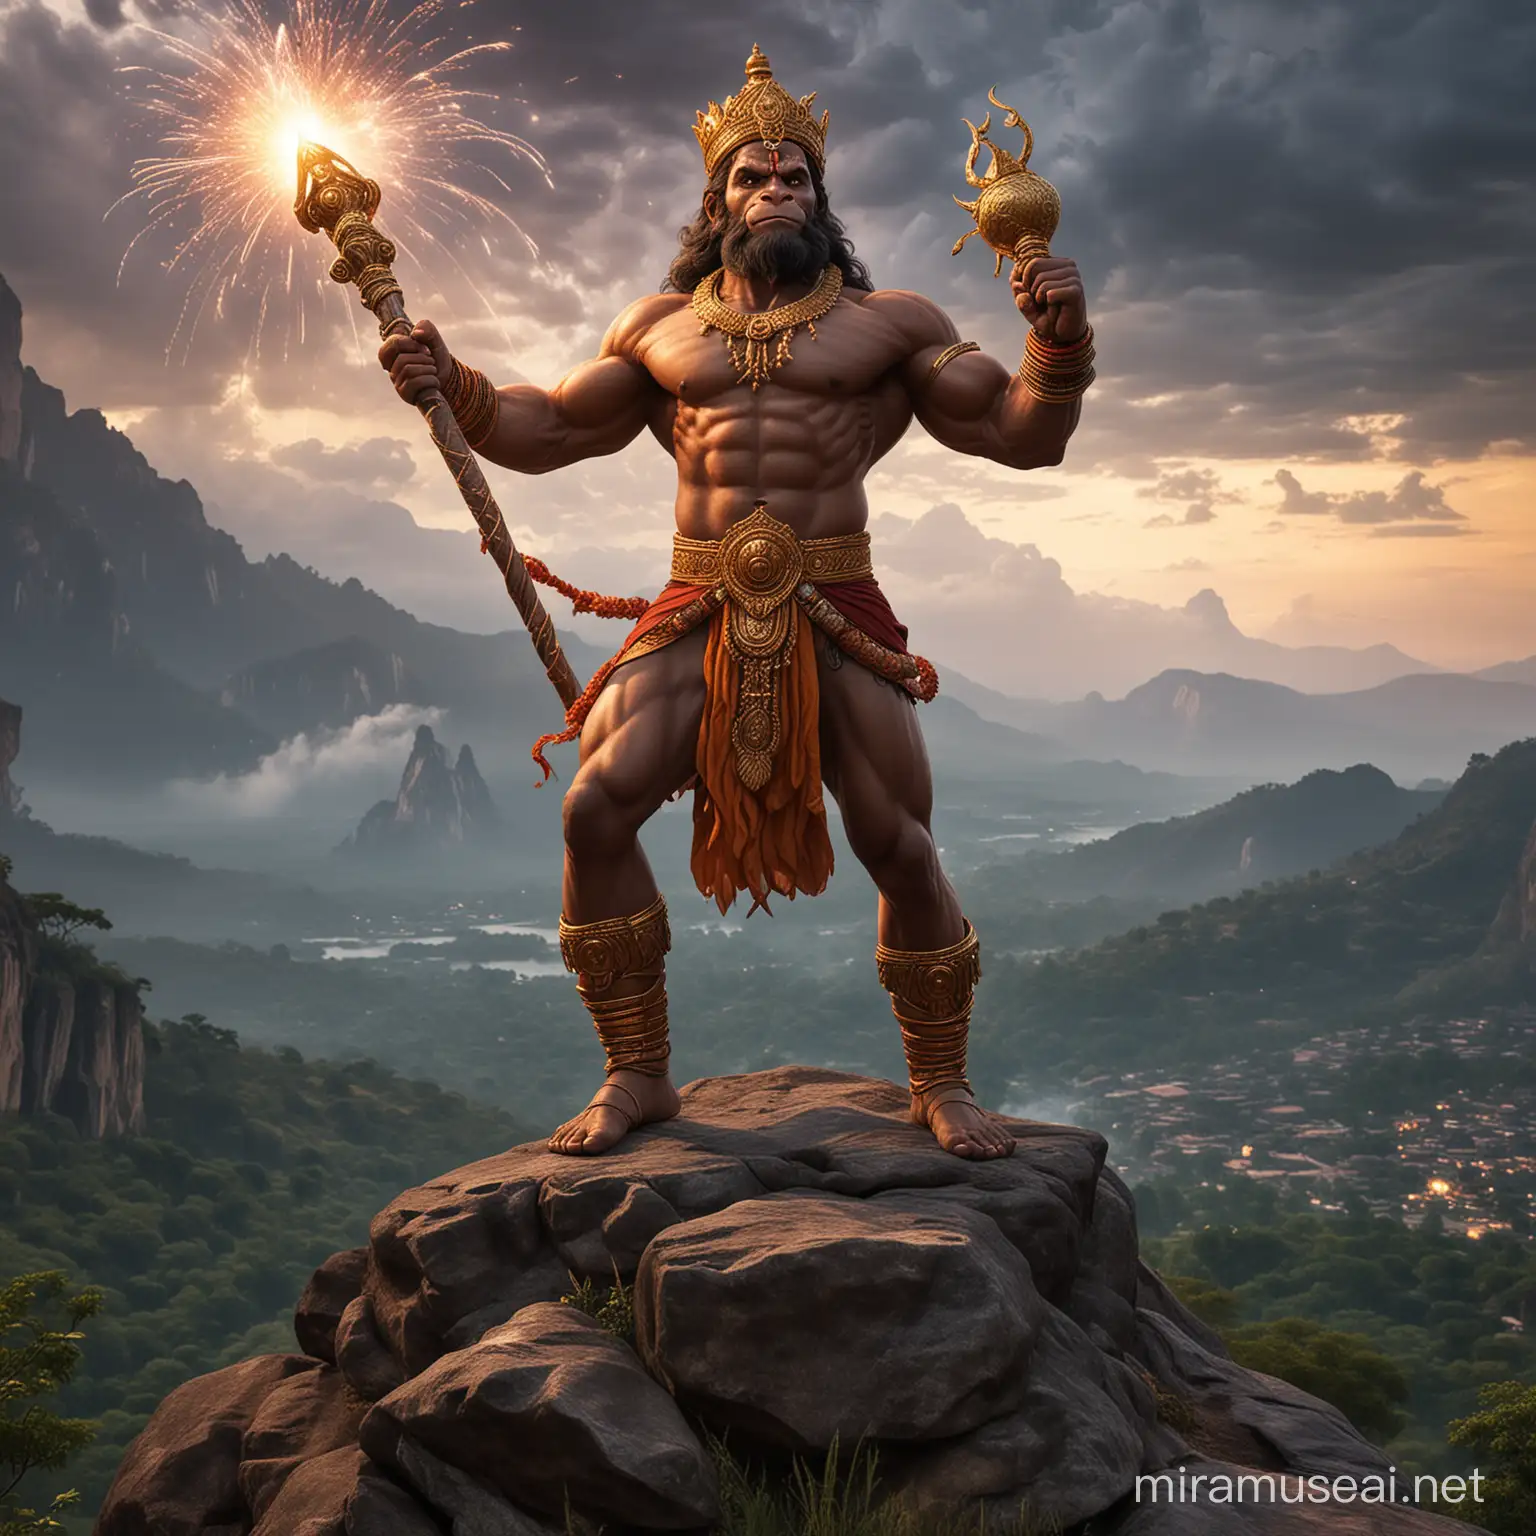 God Hanuman very muscular, tall, godly face, holding a long handle huge Golden mace bomb in right hand pointing to the sky, wearing crown, standing on a hill top, one leg stepping on a big rock, battle field in the background, detailed and intricate environment, dynamic pose, muscles defined with chiseled aesthetics, traditional attire draped elegantly, vivid, ultra realistic.
Hanuman's face is depicted glowing with a divine radiance, symbolizing his divine nature and spiritual power. His aura signifies his purity, courage, and divine protection.
Hanuman is shown wearing a crown or headgear adorned with jewels, symbolizing his royal lineage and divine status as a deity.
Hanuman's face embodies a combination of strength, wisdom, devotion, and compassion.

Thunders roar and lightning dances in the sky, painting it with wild, vibrant colors. Each bolt of electricity illuminates the darkness, revealing the intricate patterns of clouds swirling like celestial brushstrokes. The rumble of thunder echoes through the air, shaking the earth beneath with its power. Nature's own fireworks display, a spectacle both awe-inspiring and humbling, as if the sky itself has come alive with energy and passion.
